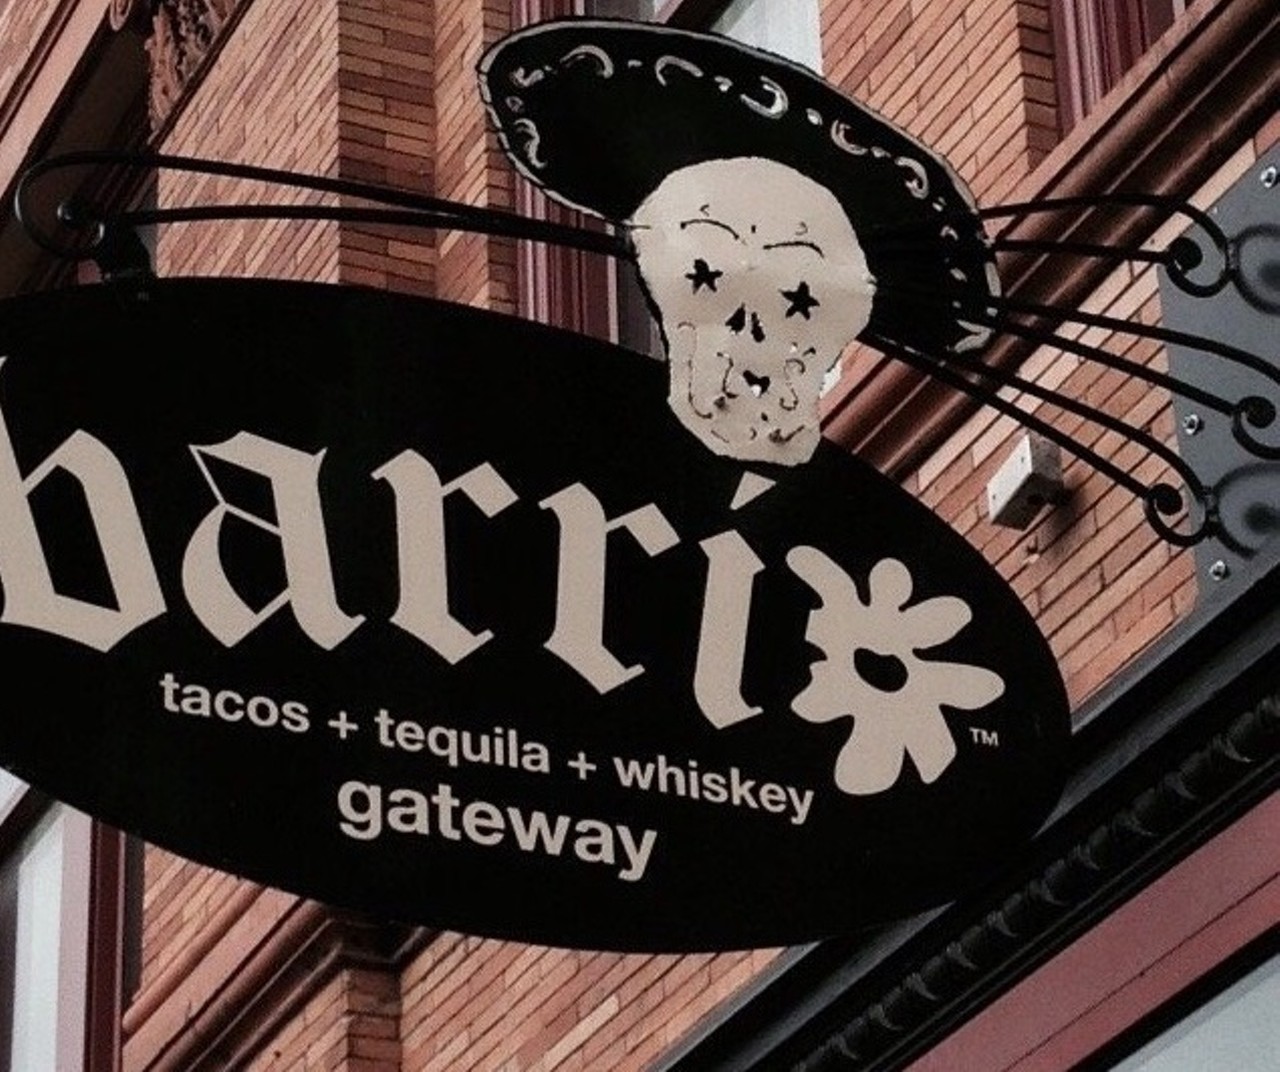  Barrio
Multiple Locations
Yeah, Barrio has blown up in recent years with locations all over town. But their expansion has just made them more beloved in the eyes of Clevelanders, because now whereever you live, you&#146;re a stone&#146;s throw away from some delicious and inexpensive tacos. 
Photo via @Barrio_Cleveland/Instagram